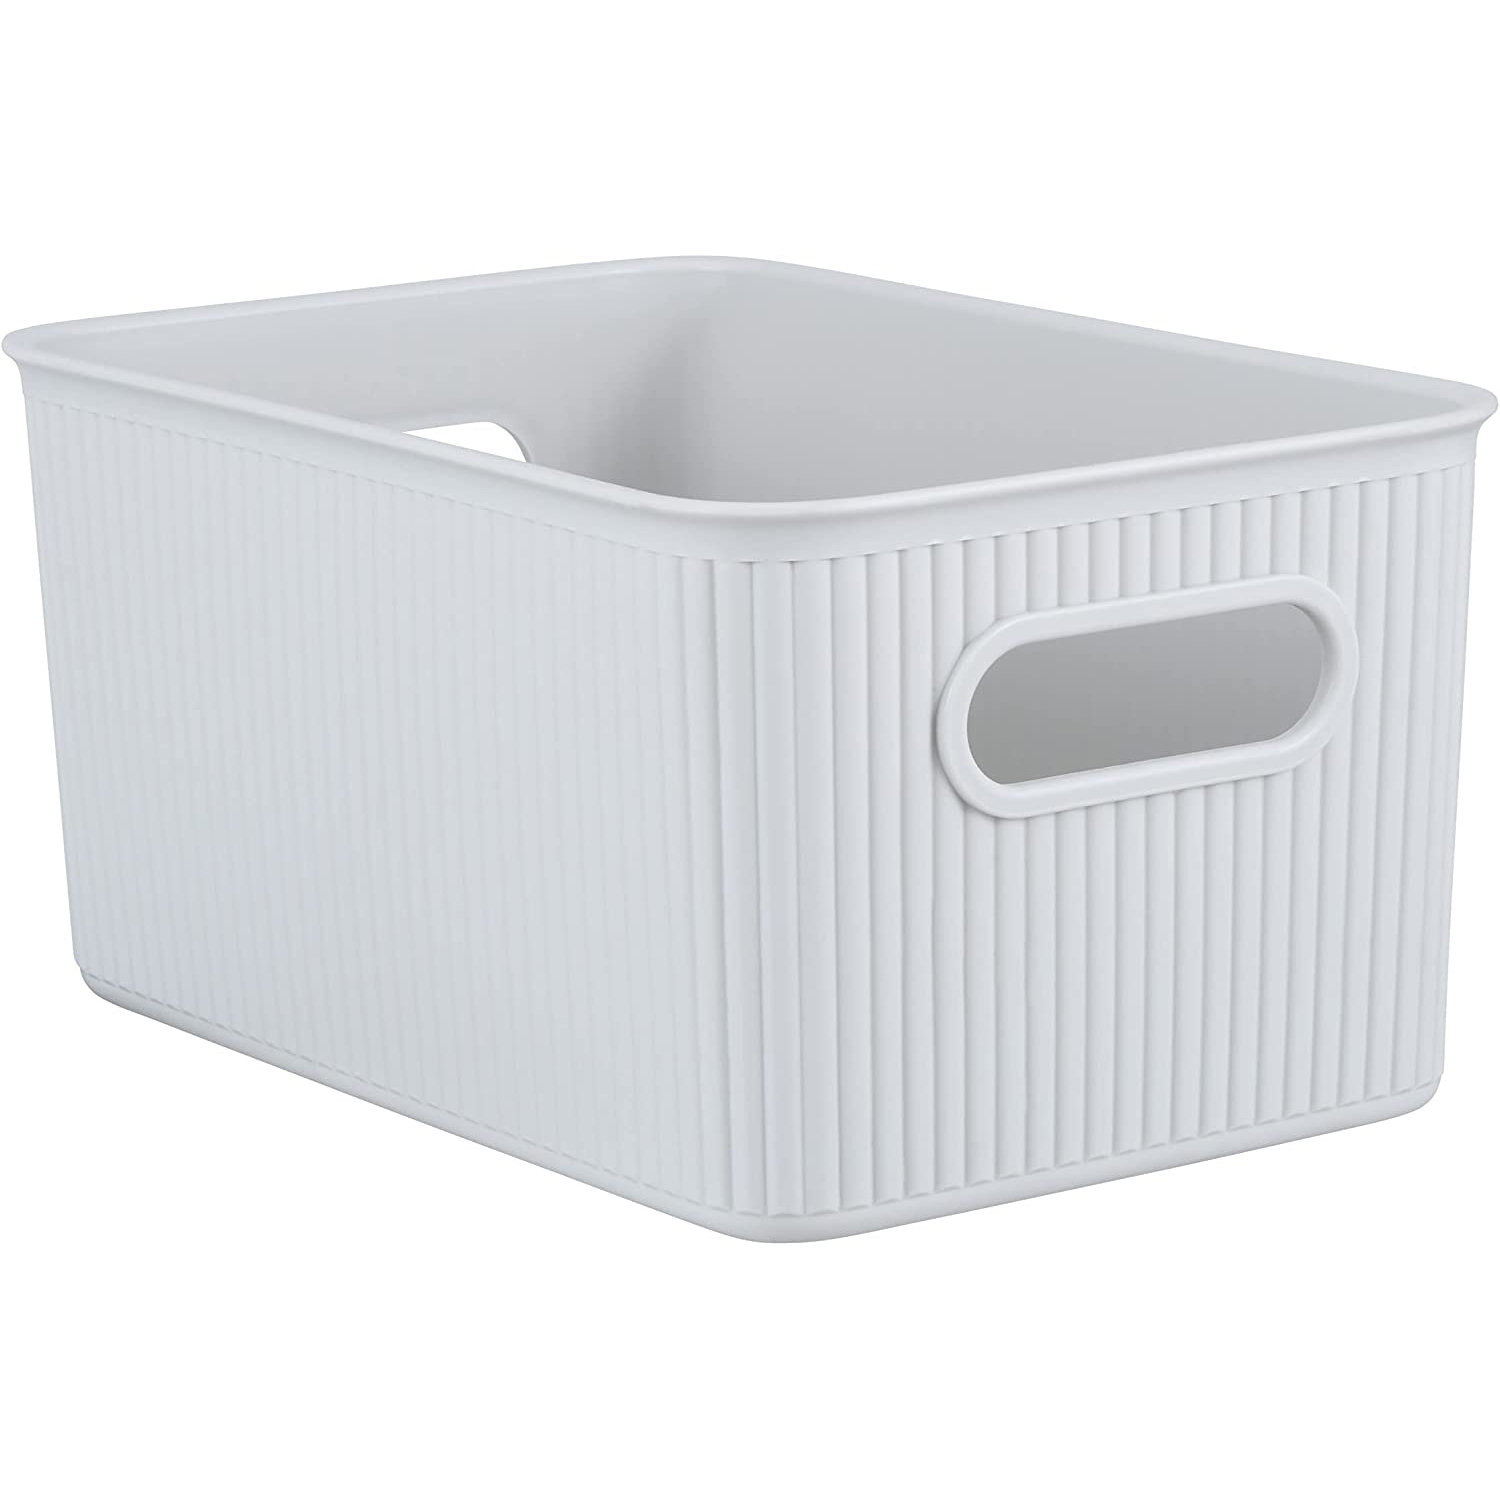 Plastic Basket, Small | The Plastic Collection | Multi-Use Storage Bins |  Durable, Drawer & Cabinet-Friendly | Storage Baskets for Organizing |  Pantry